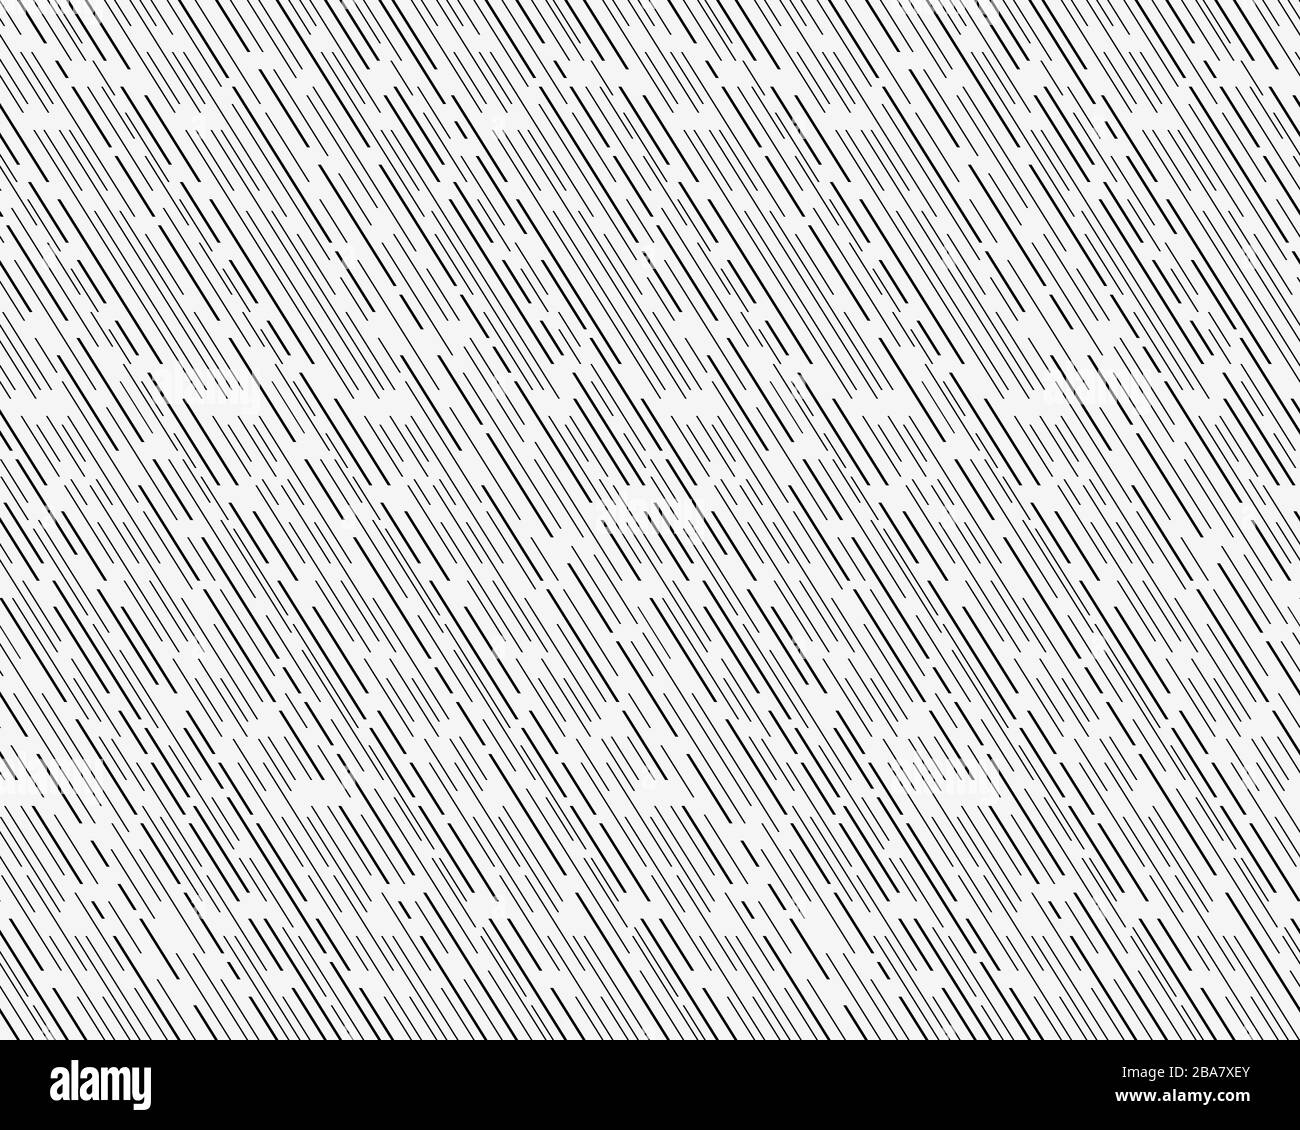 Sloping dashed lines, seamless pattern background on a white background Stock Photo